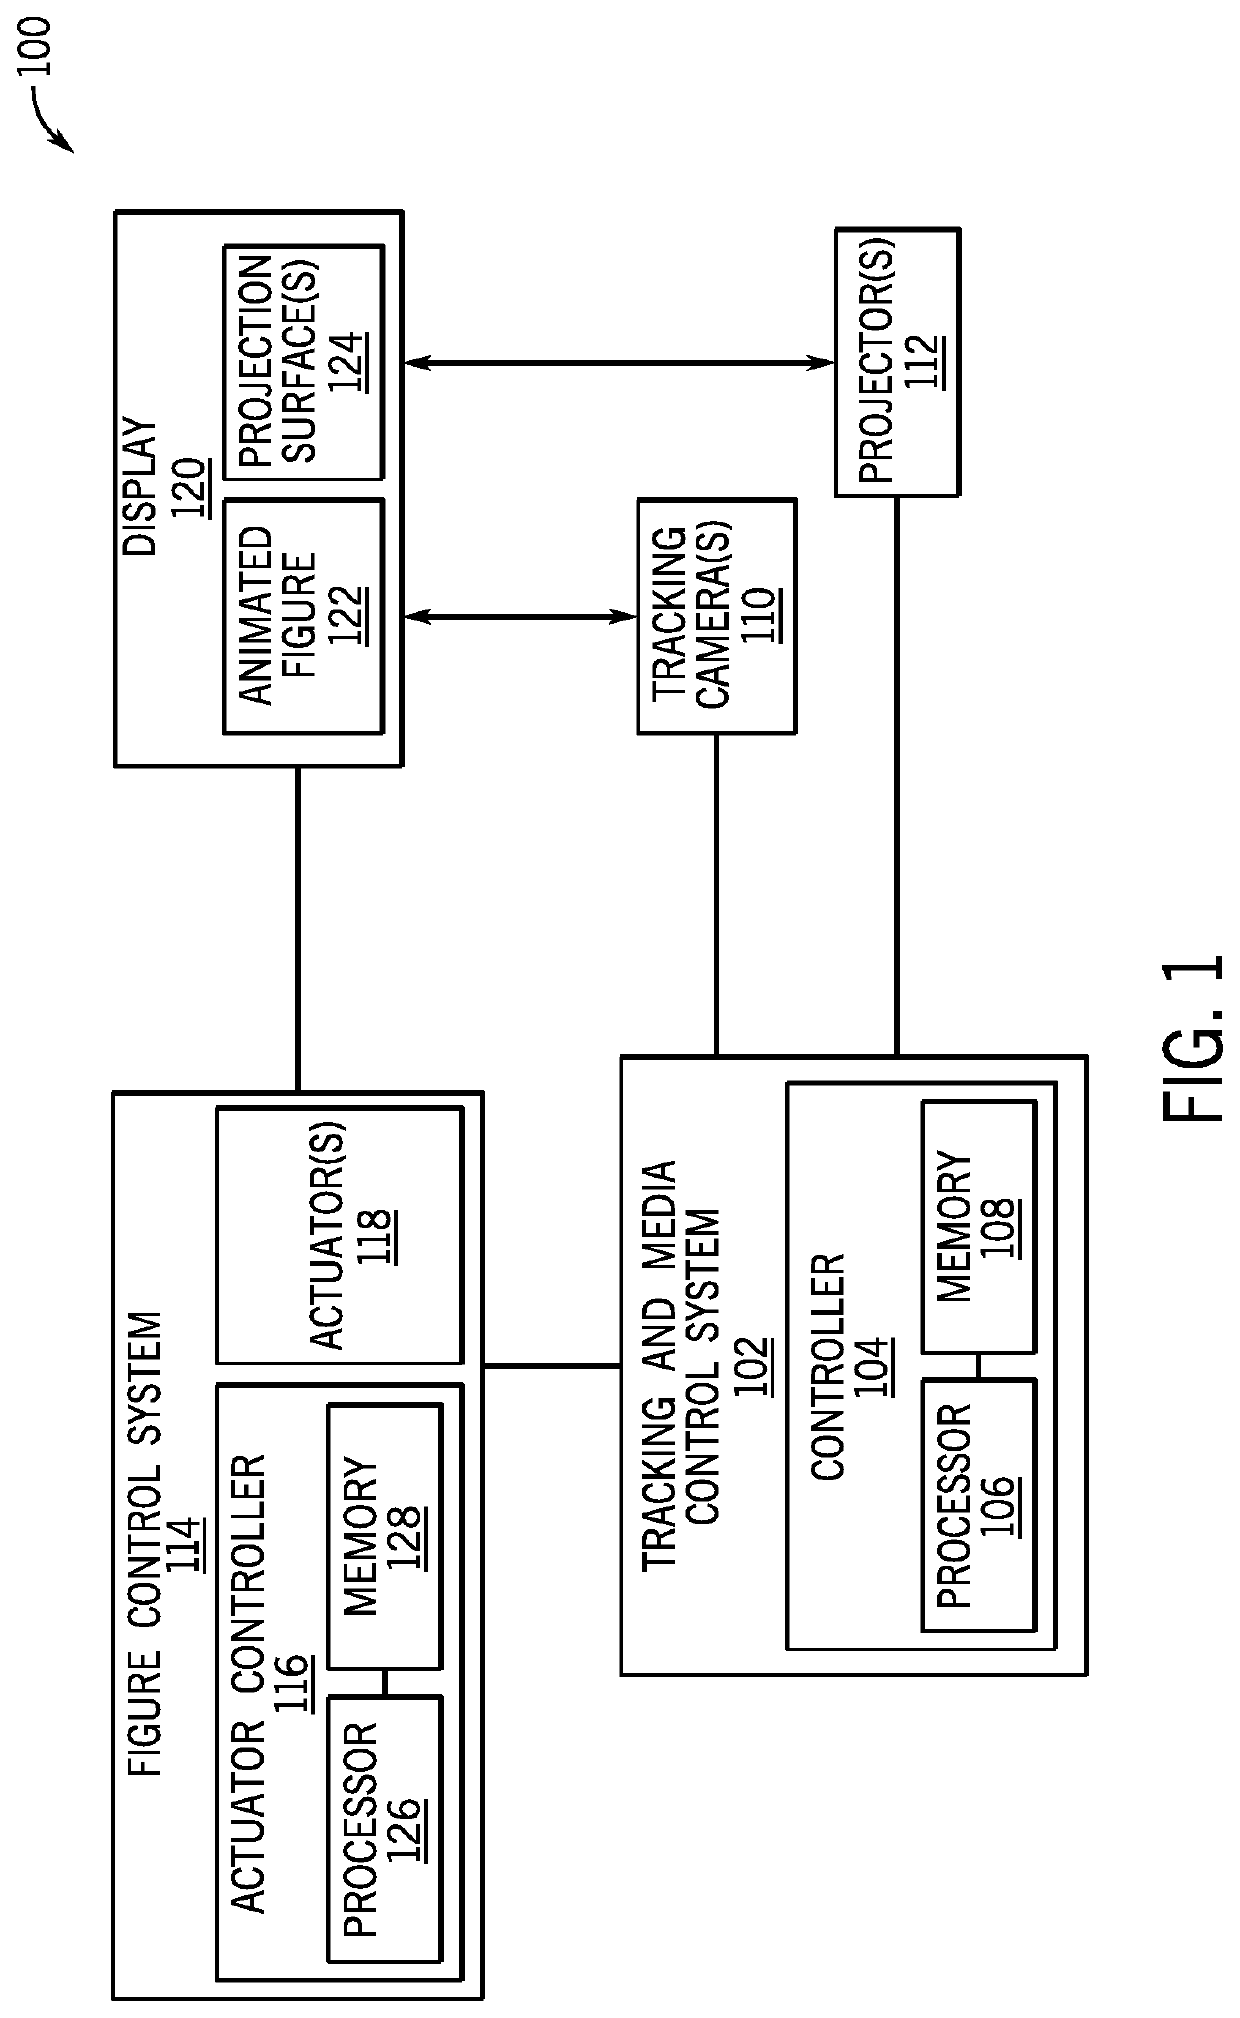 Systems and methods for animated figure display